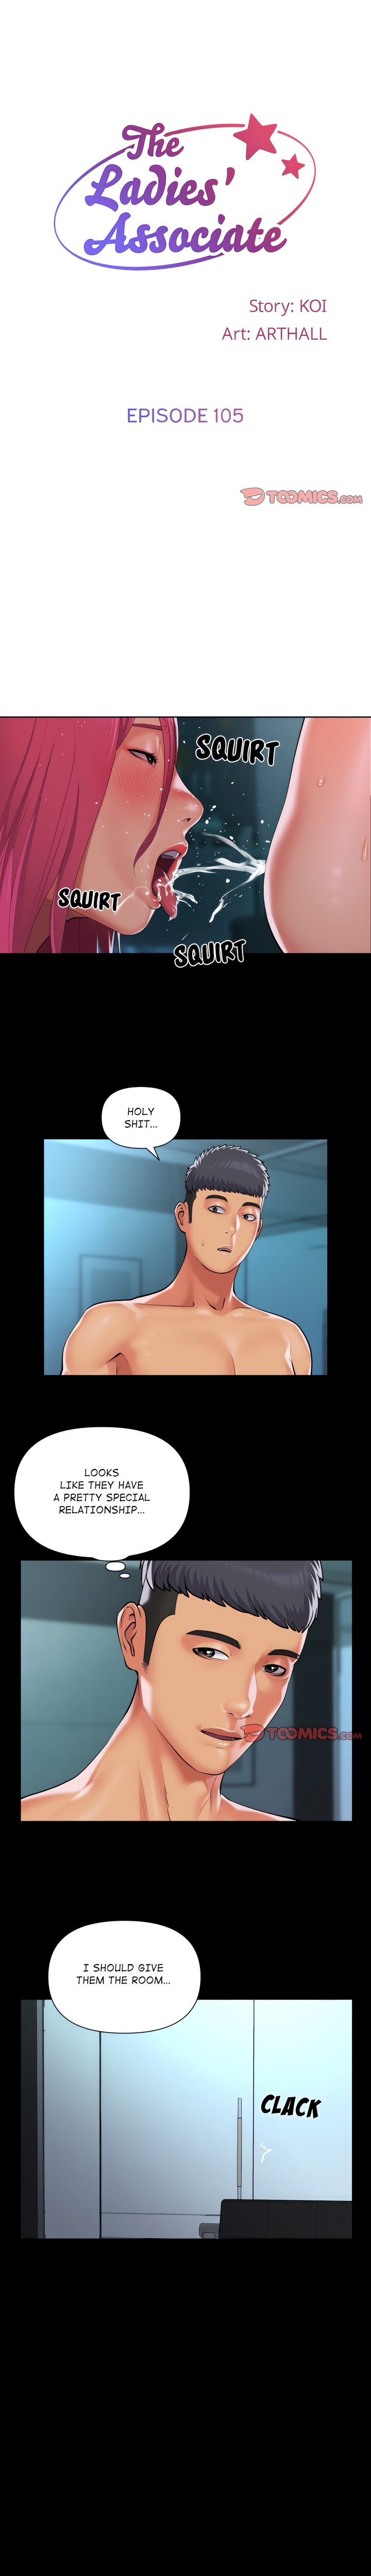 Panel Image 1 for chapter 105 of manhwa The Ladies’ Associate on read.oppai.stream